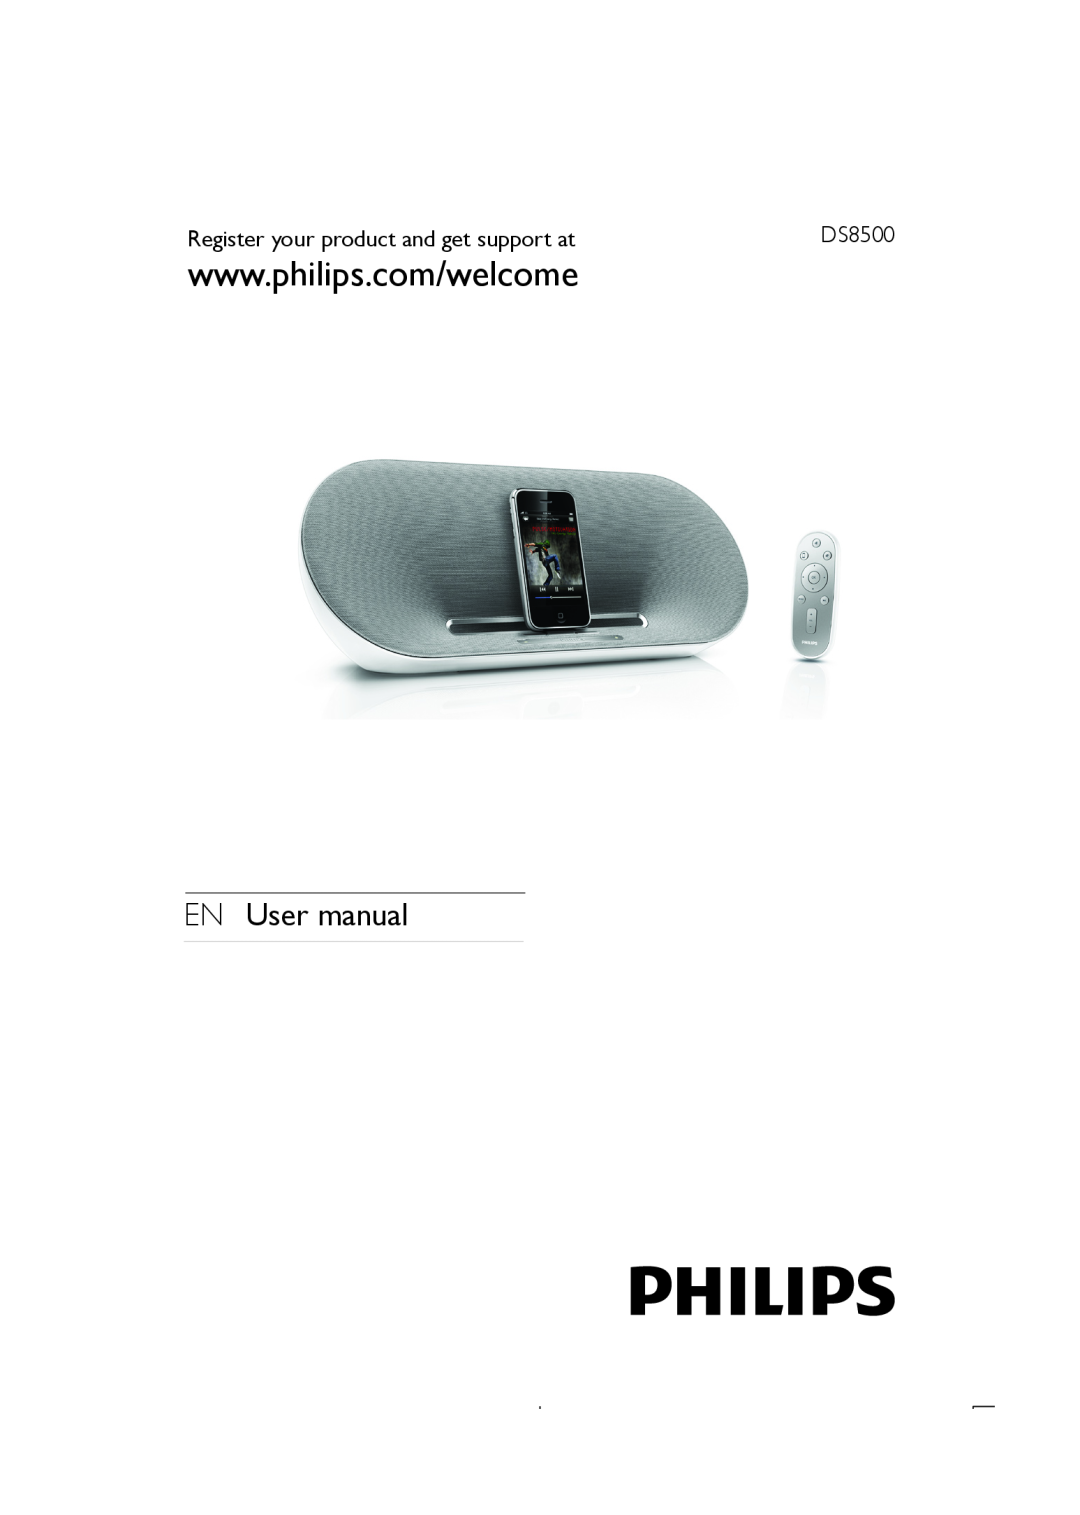 Philips DS8500 user manual EN User manual, Register your product and get support at 